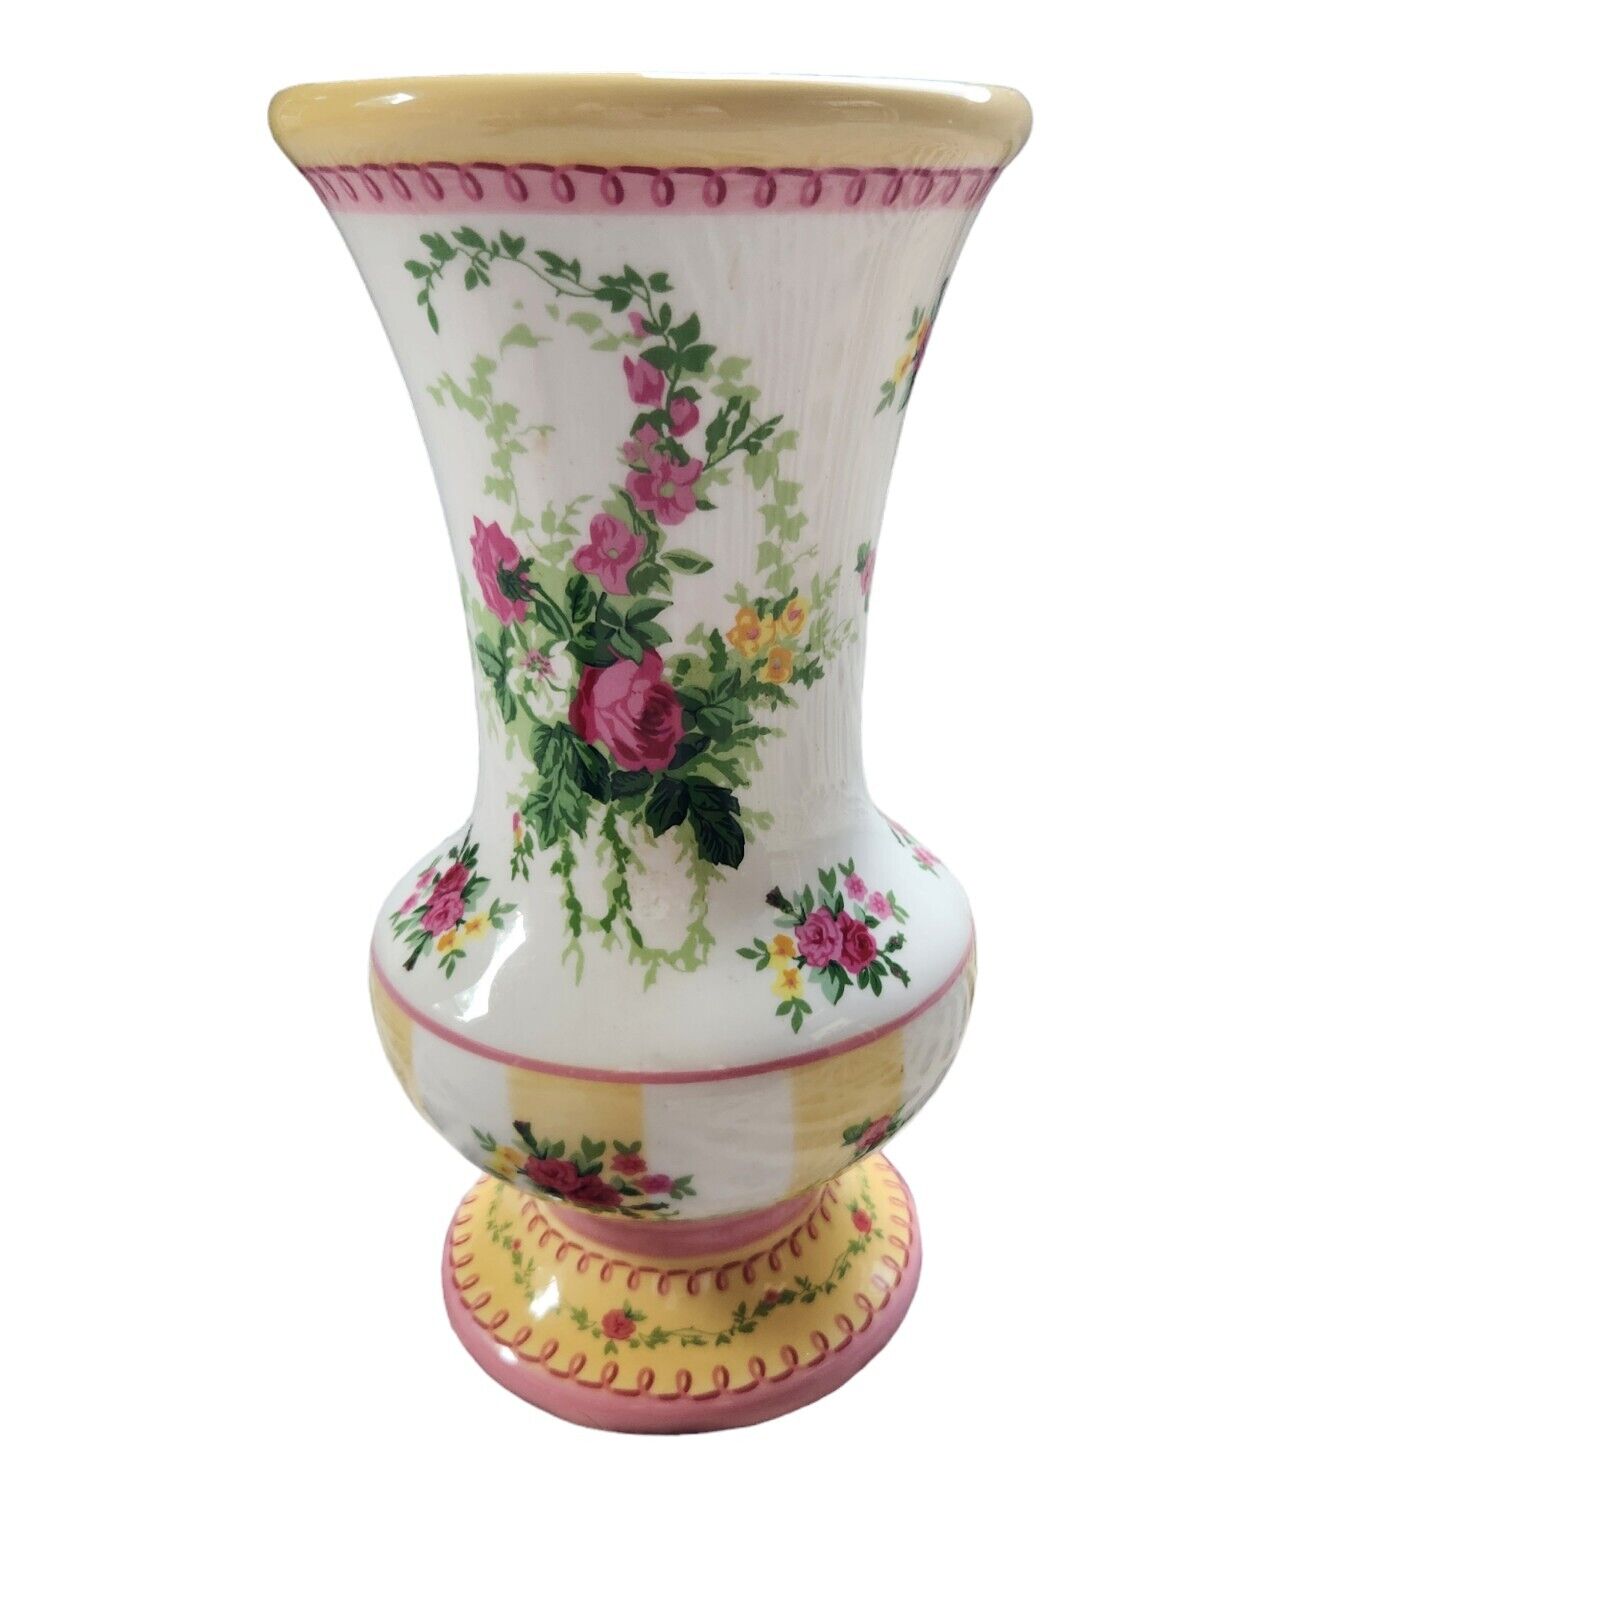 Laura Ashley Flower Vase Fluted Tea Roses Yellow Pink White Ceramic 9 inches